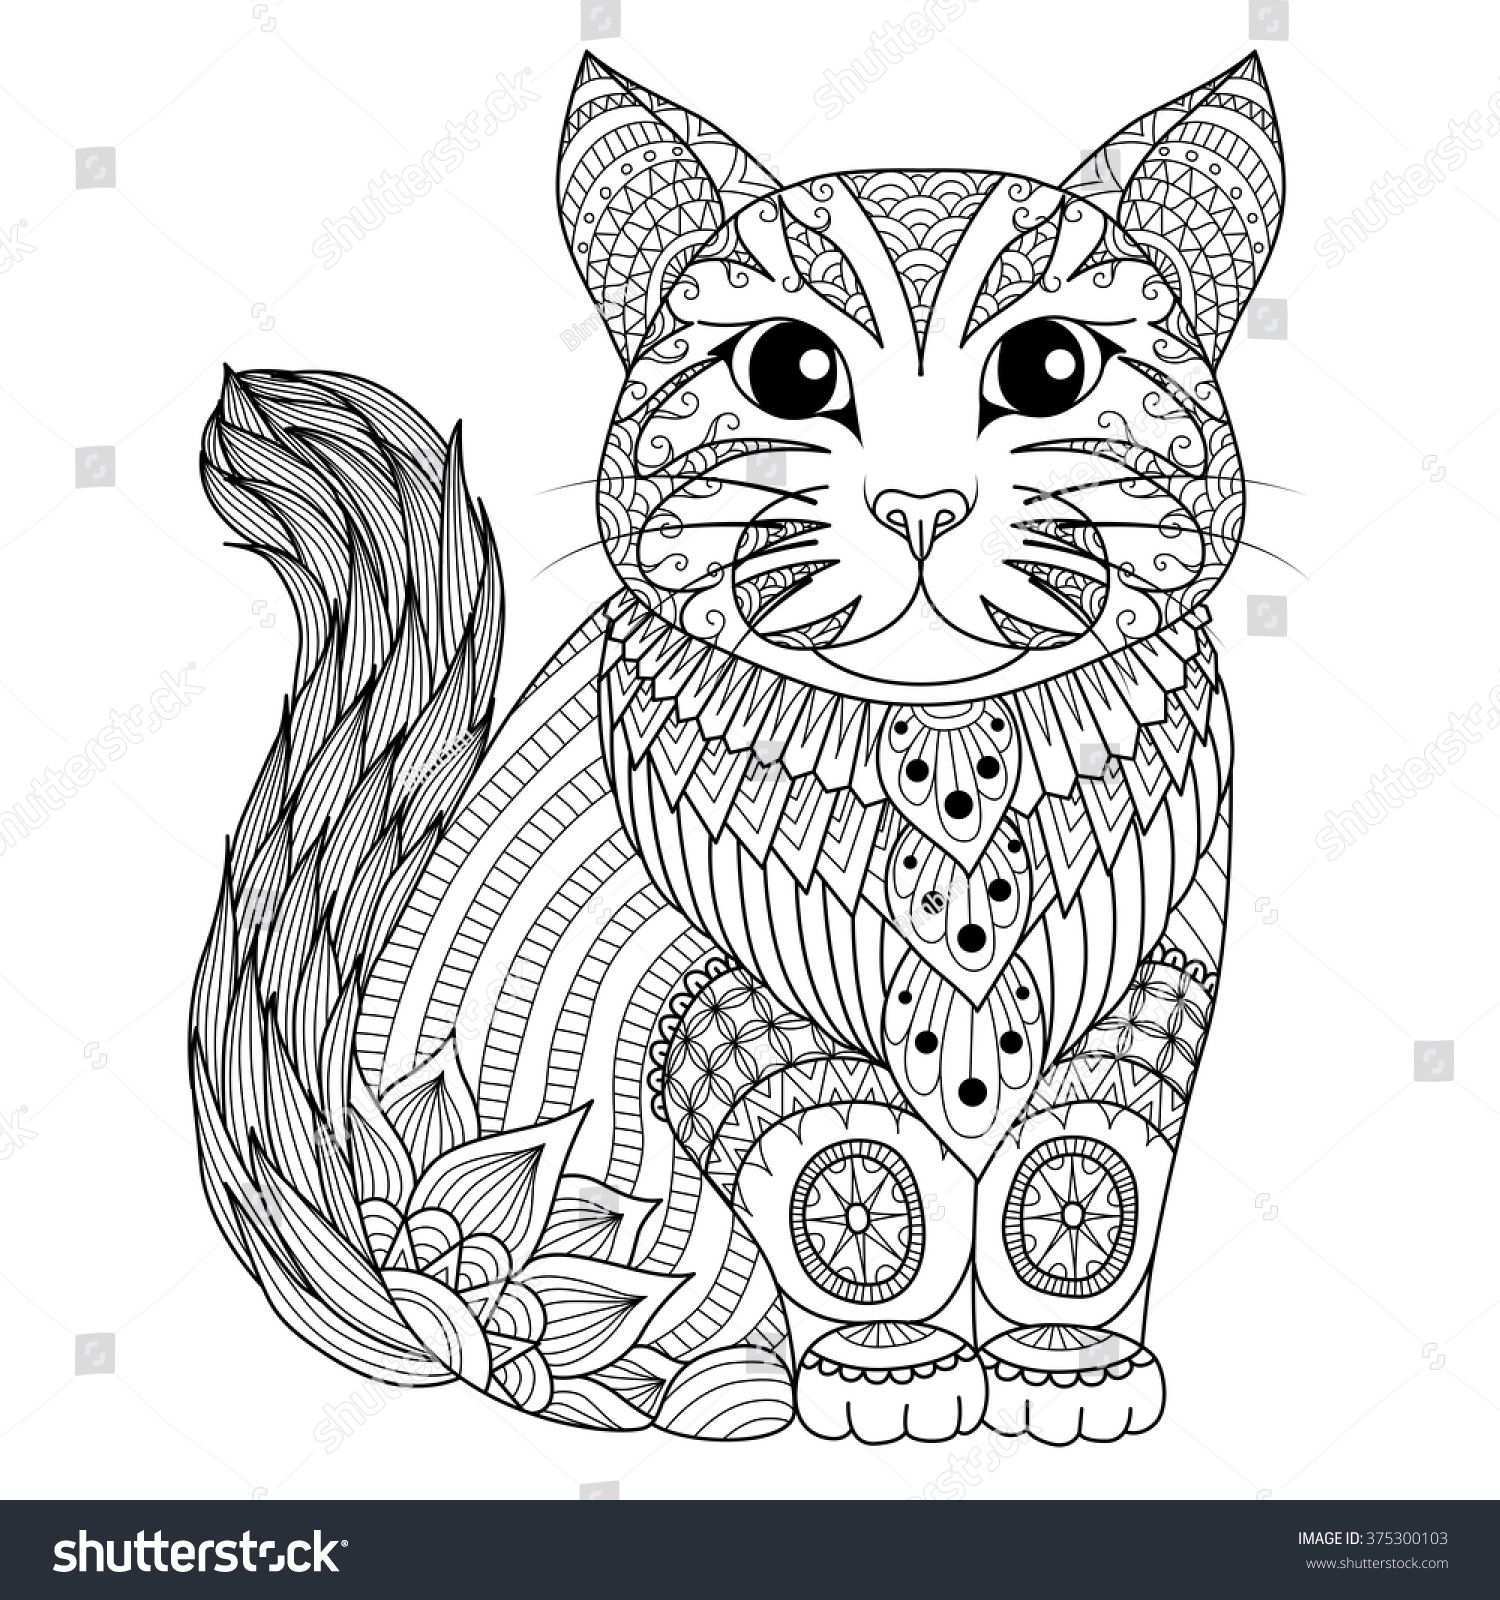 Drawing Zentangle Cat For Coloring Page Shirt Design Effect Logo Tattoo And Decoratio